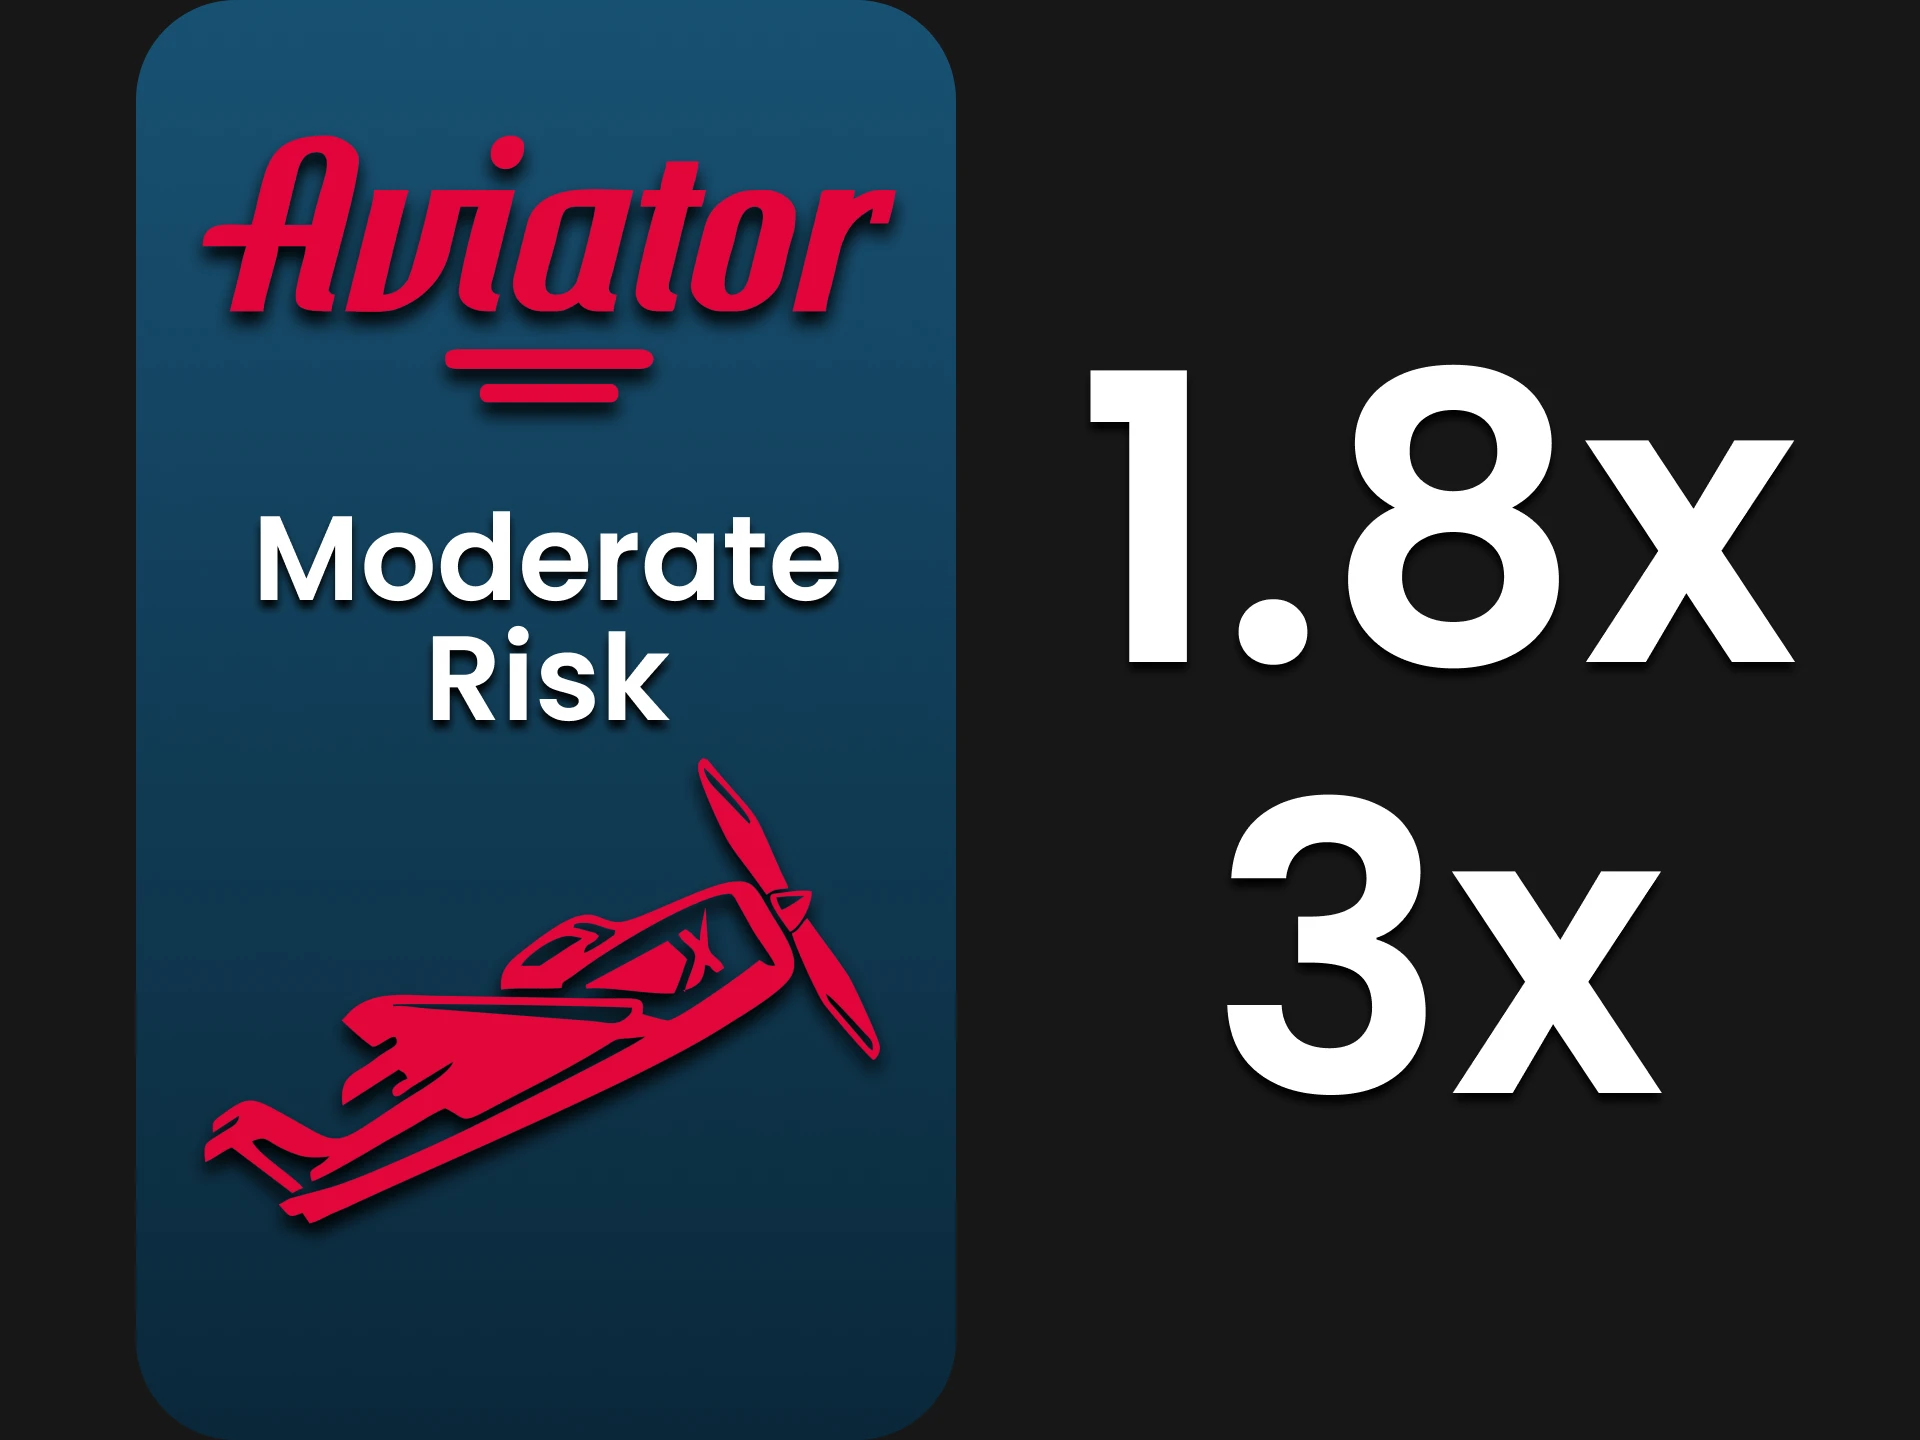 Use Moderate Risk to win Aviator.